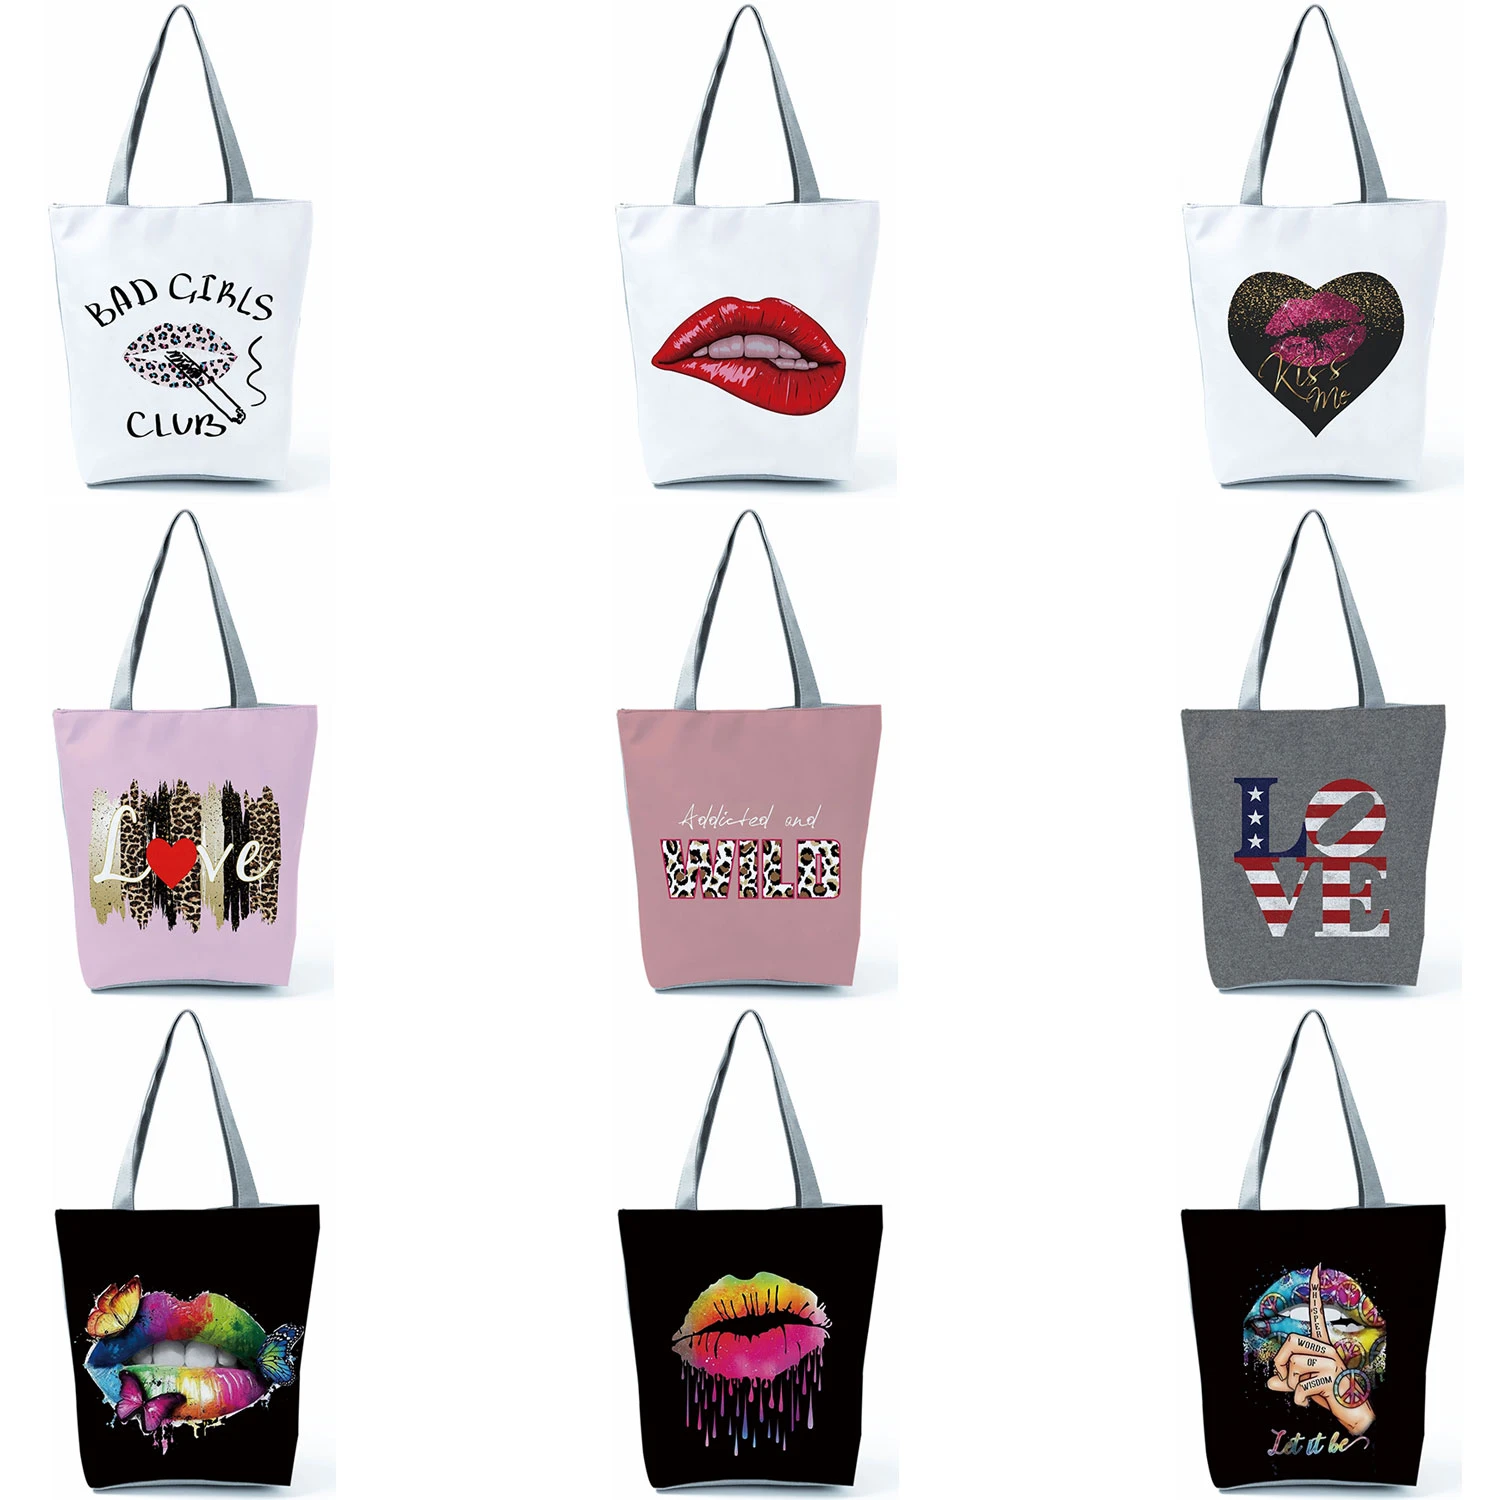 Handbags Lady Totes Shopping Bag Reusable Women Tote Bag Shoulder Work Bags Girls Black Kiss Leopard Lips Graphic Bags New Funny